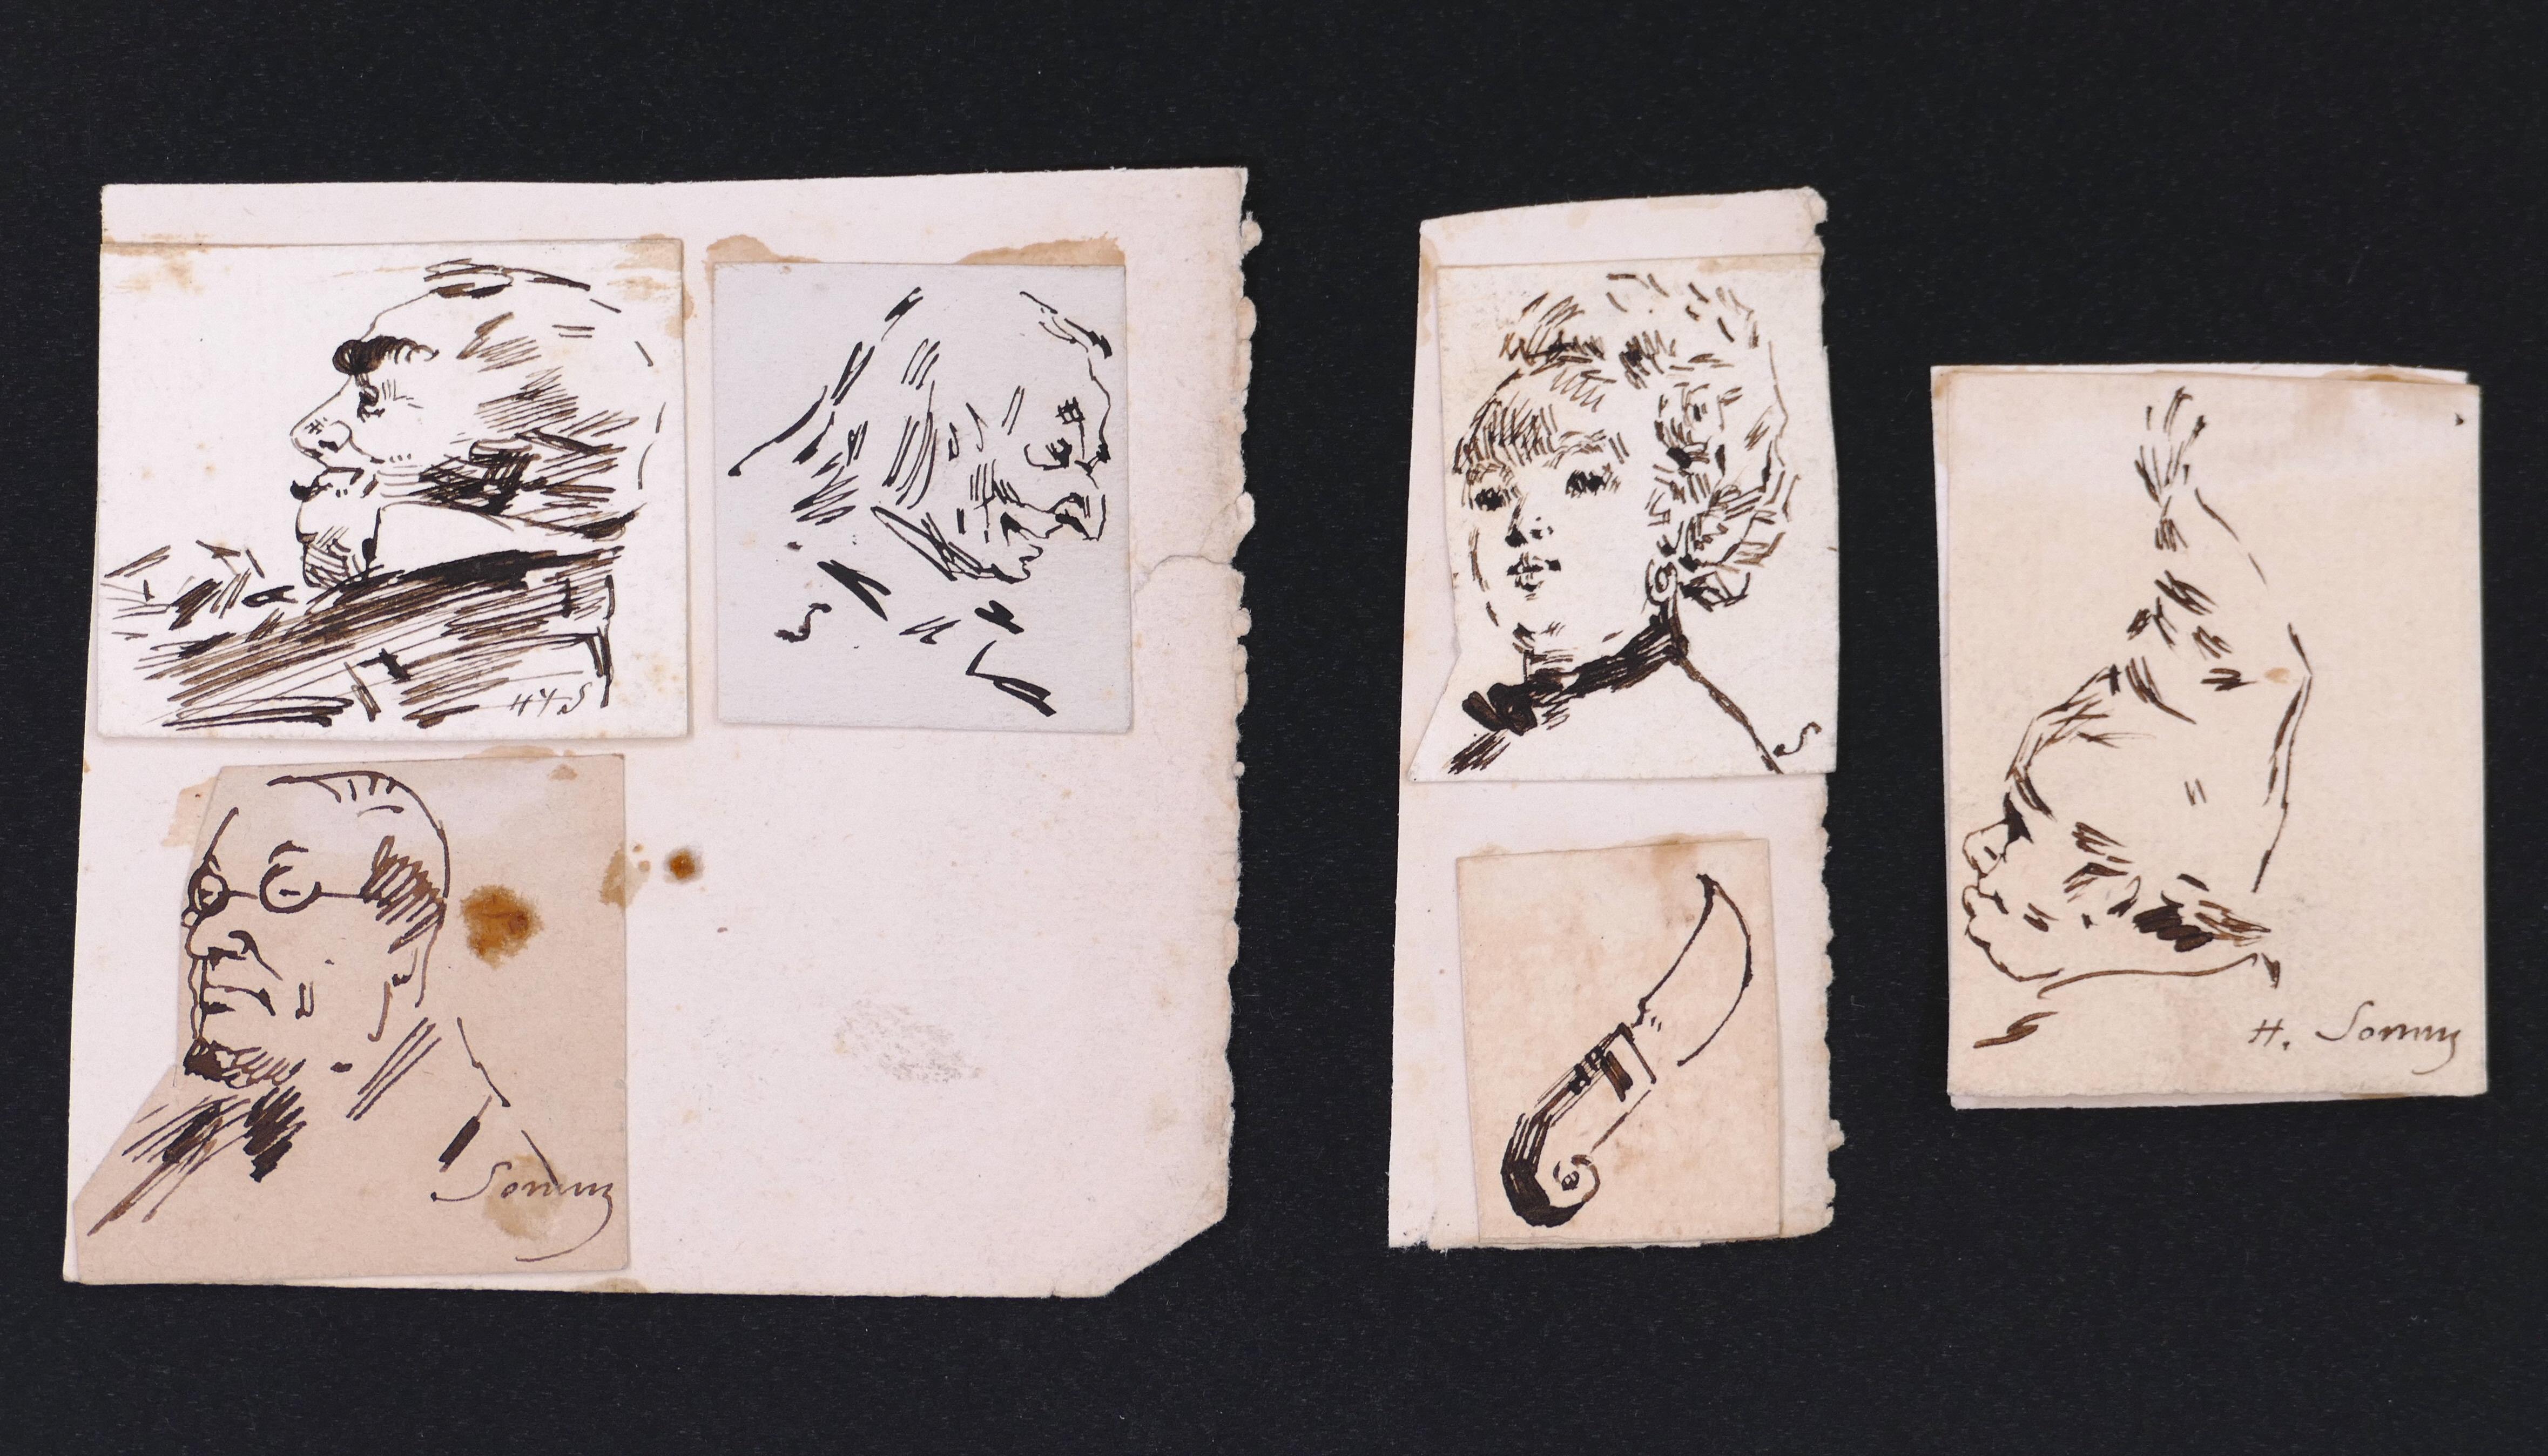 Portraits - Original Ink Drawings on Paper by H. Somm - Late 19th Century - Art by Henry Somm